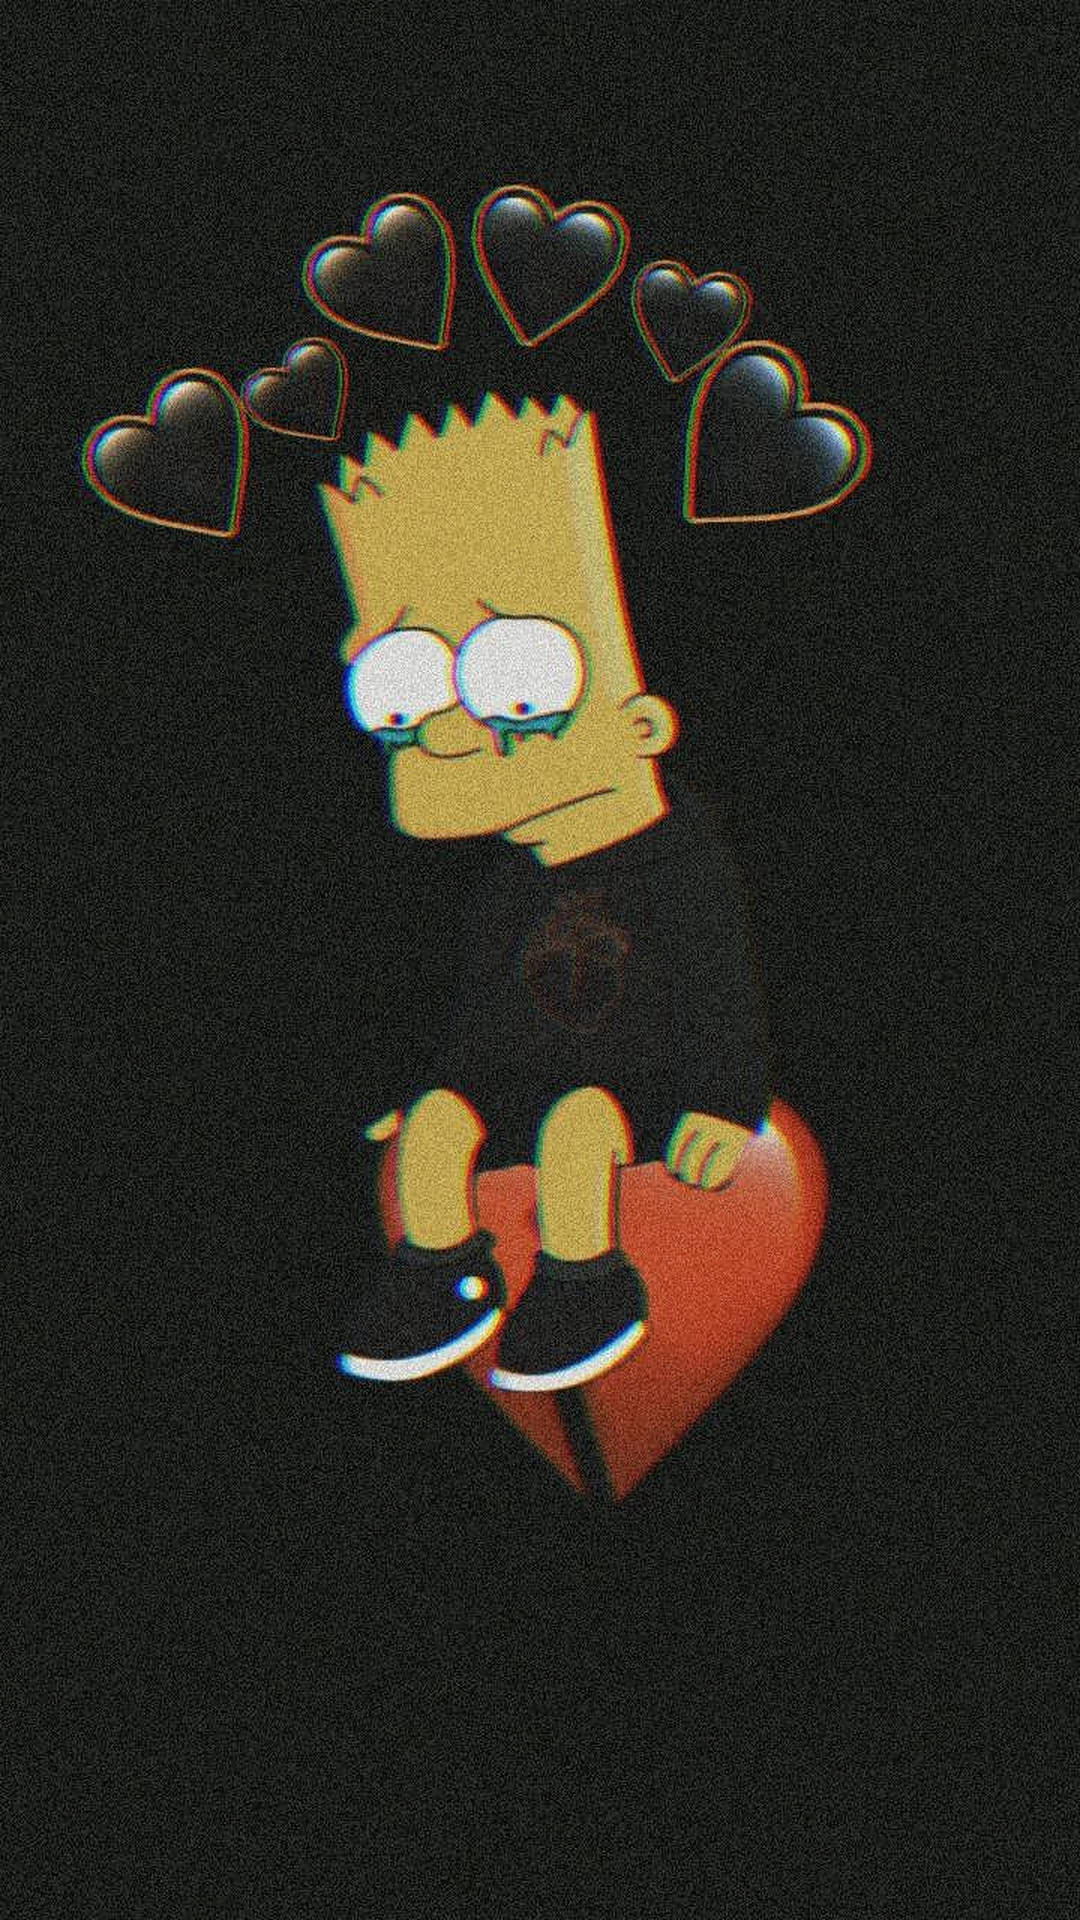 Bart Simpson Wallpaper iPhone with high-resolution 1080x1920 pixel. You can use this wallpaper for your iPhone 5, 6, 7, 8, X, XS, XR backgrounds, Mobile Screensaver, or iPad Lock Screen - Bart Simpson